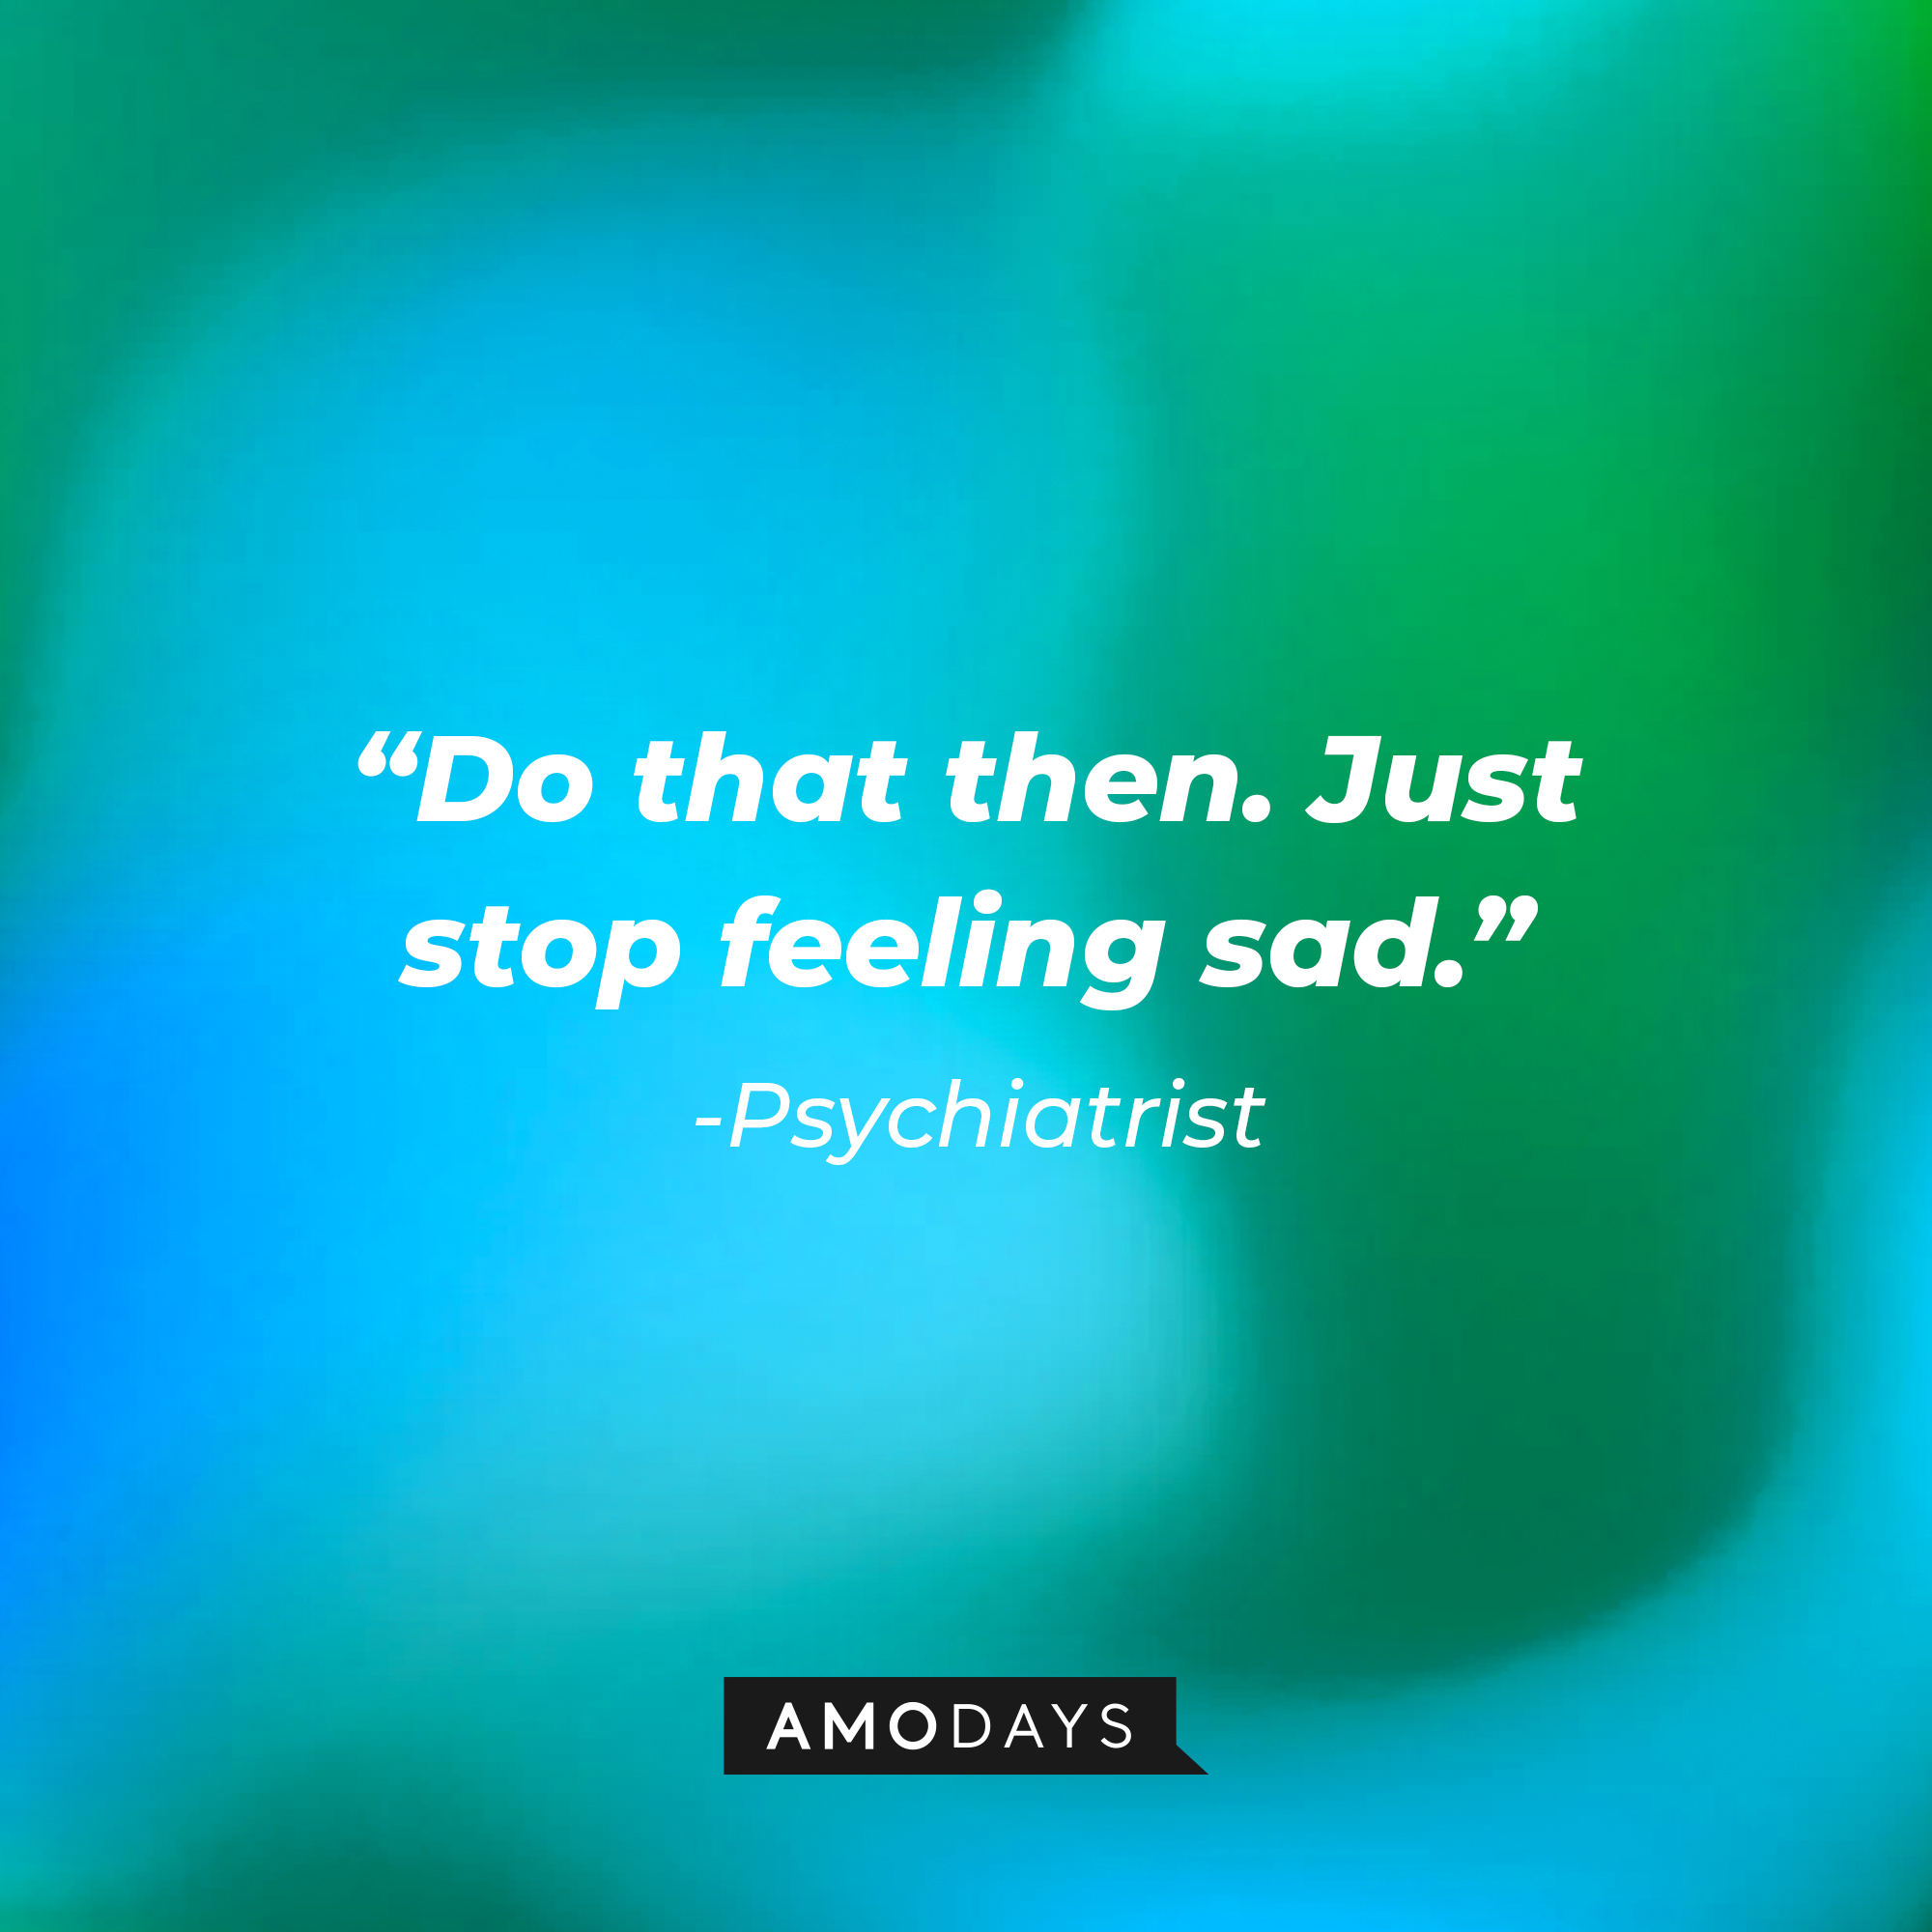 Psychiatrist’s quote: "Do that then. Just stop feeling sad." |  Source: AmoDays